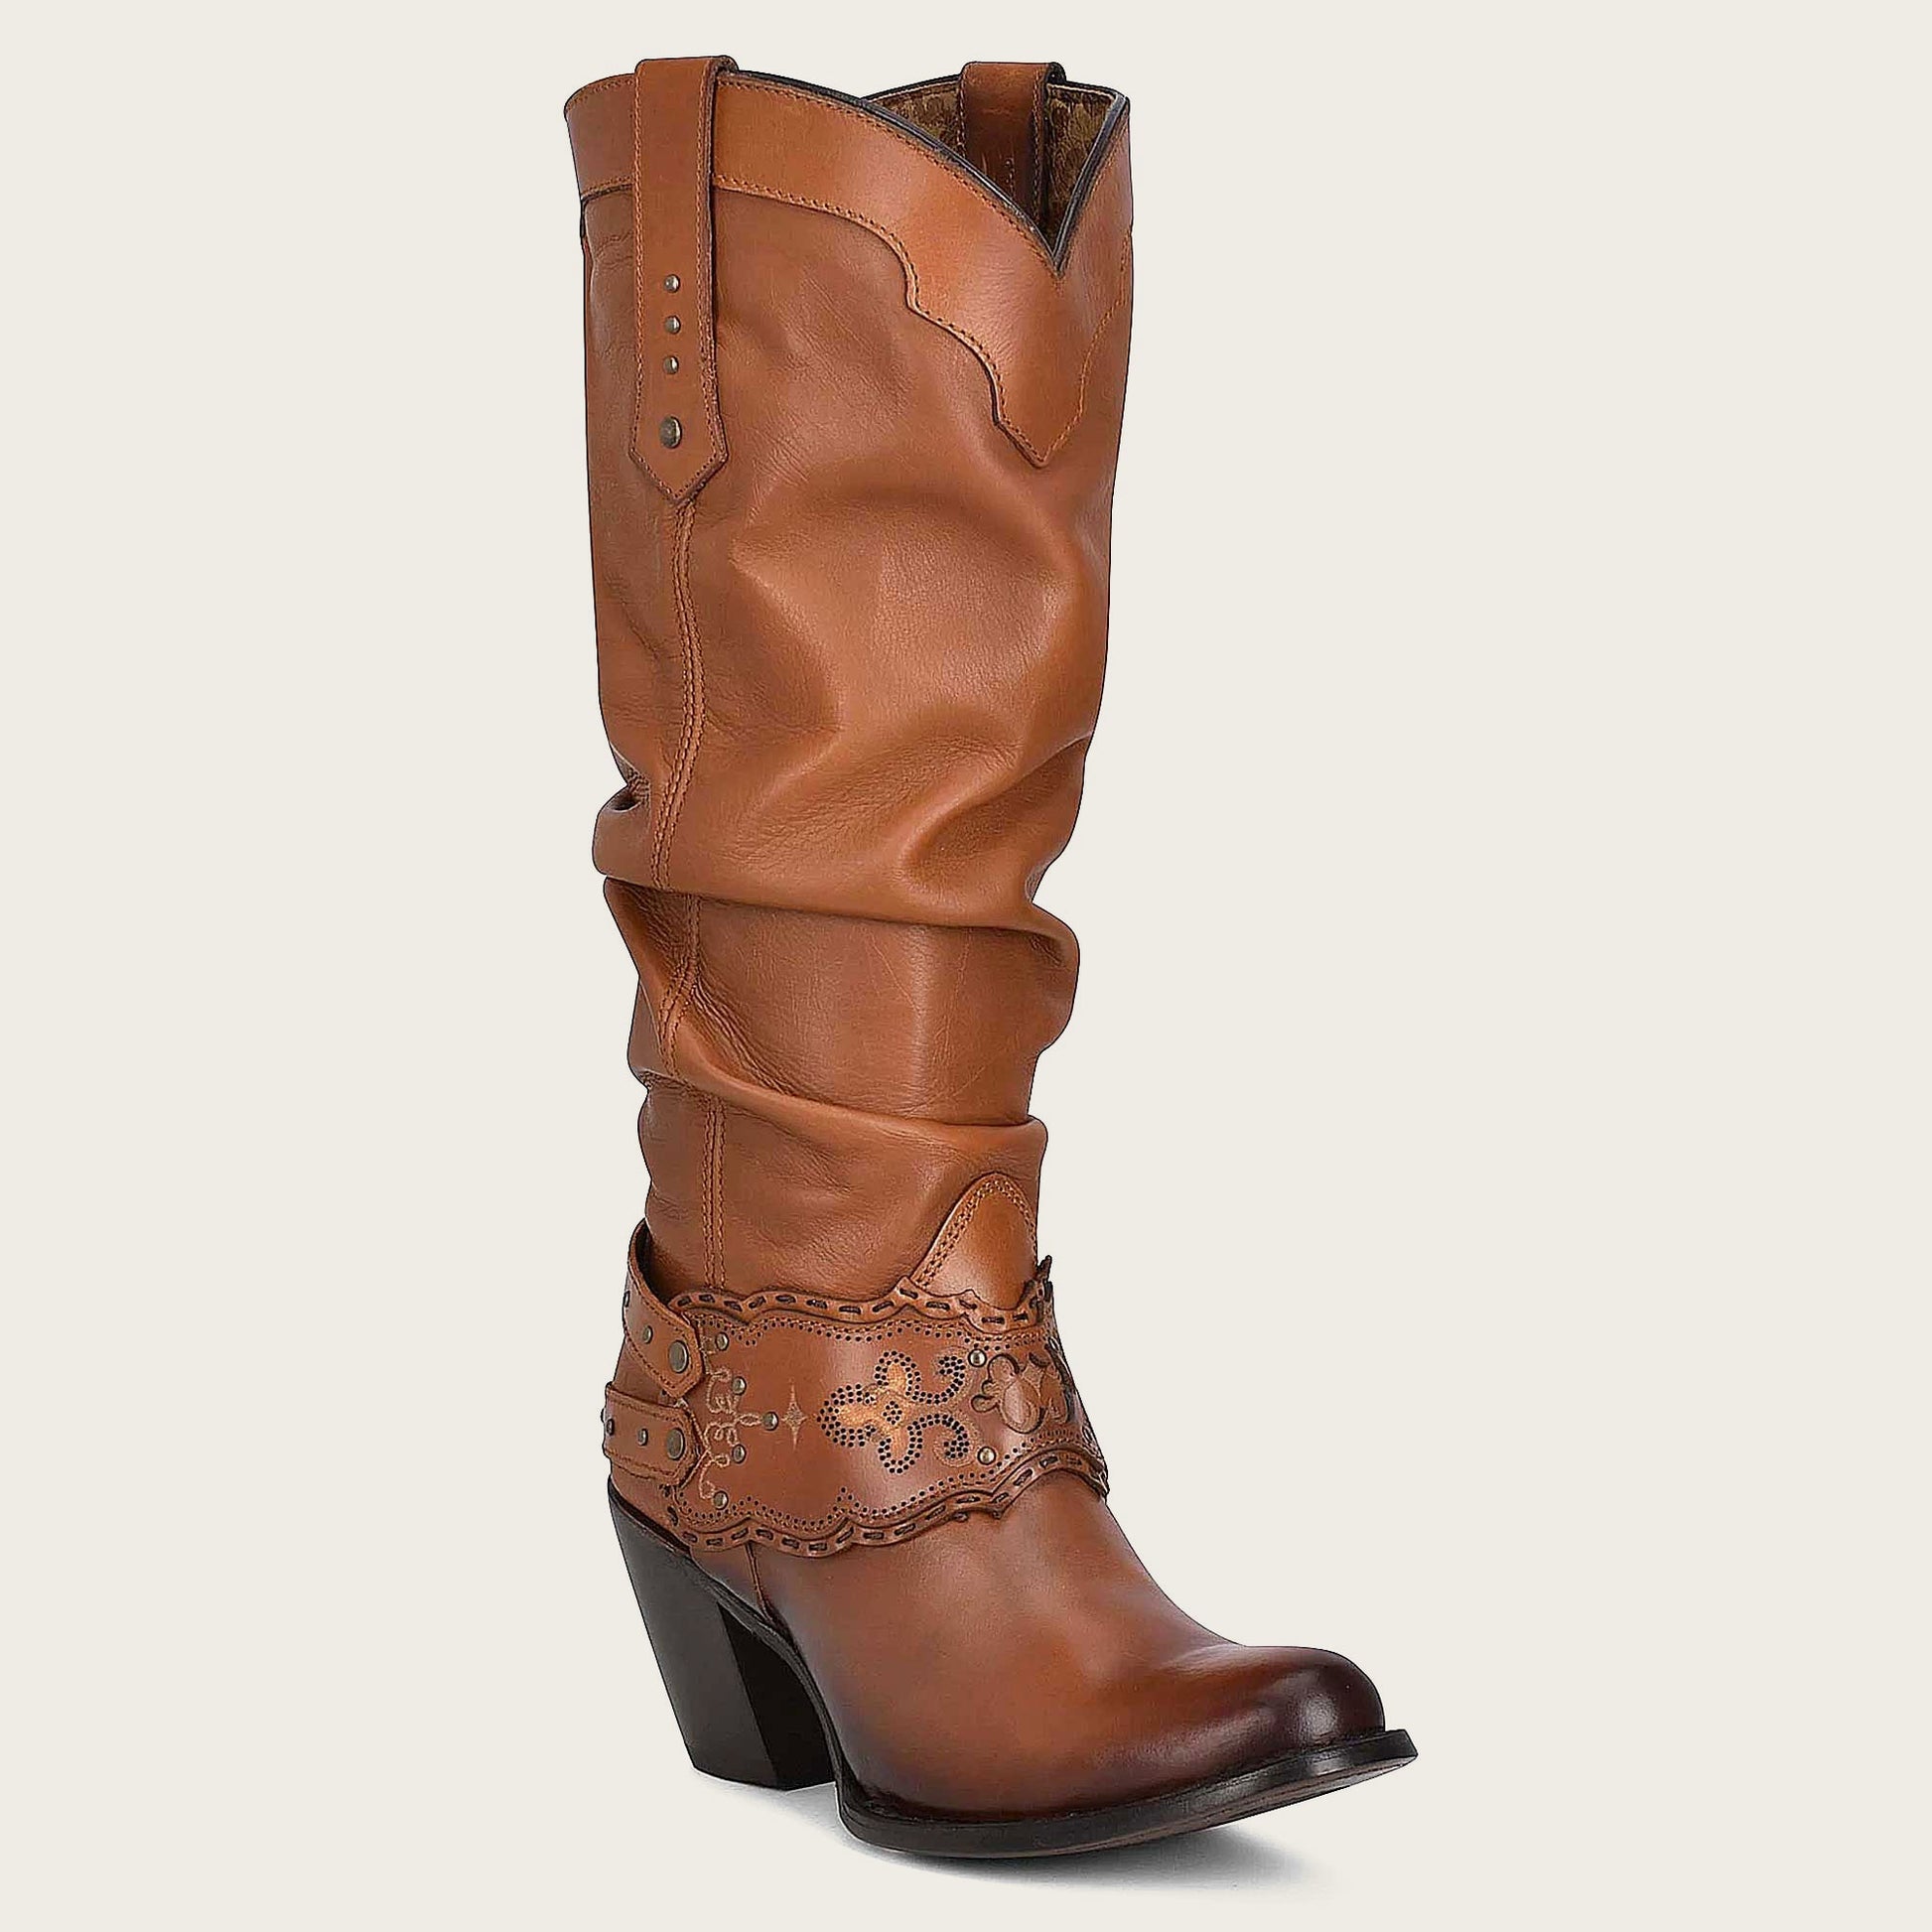 Cuadra brown western cowgirl cowhide leather knee high boots for women –